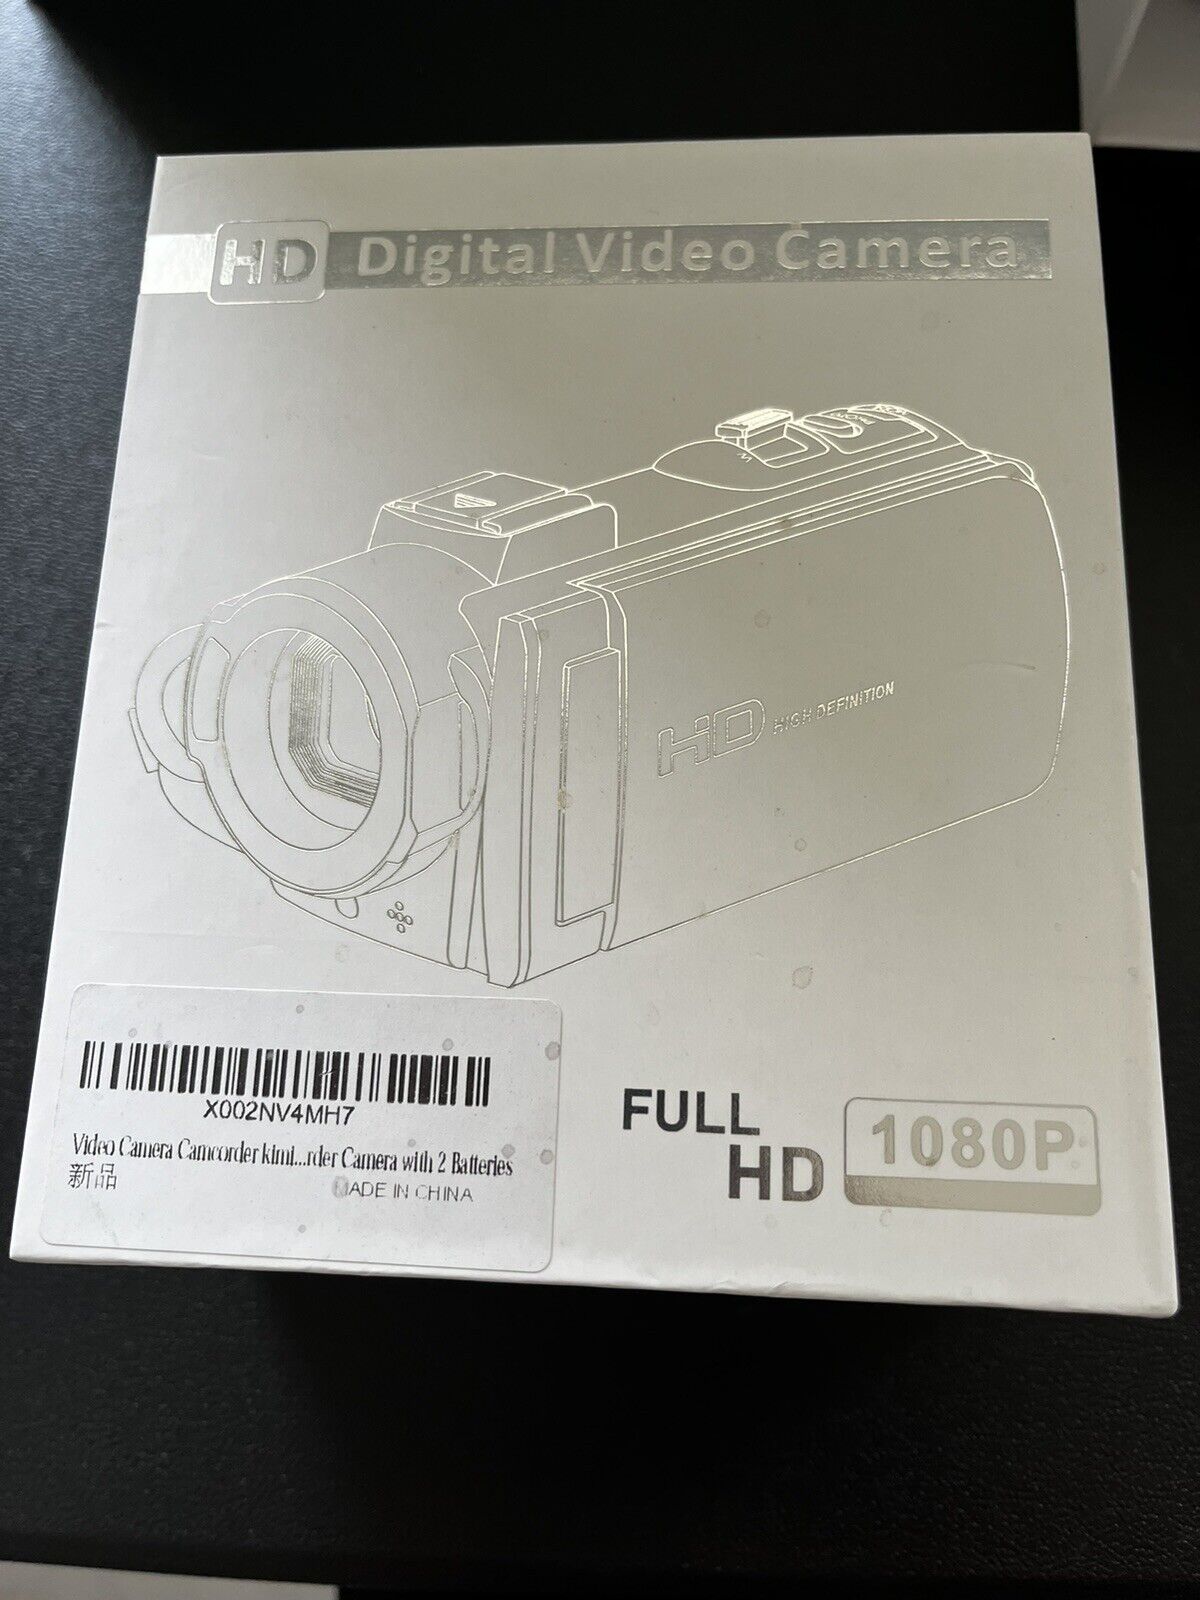 KIMIRE HD 1080P DIGITAL CAMCORDER -- BRAND NEW/NEVER USED